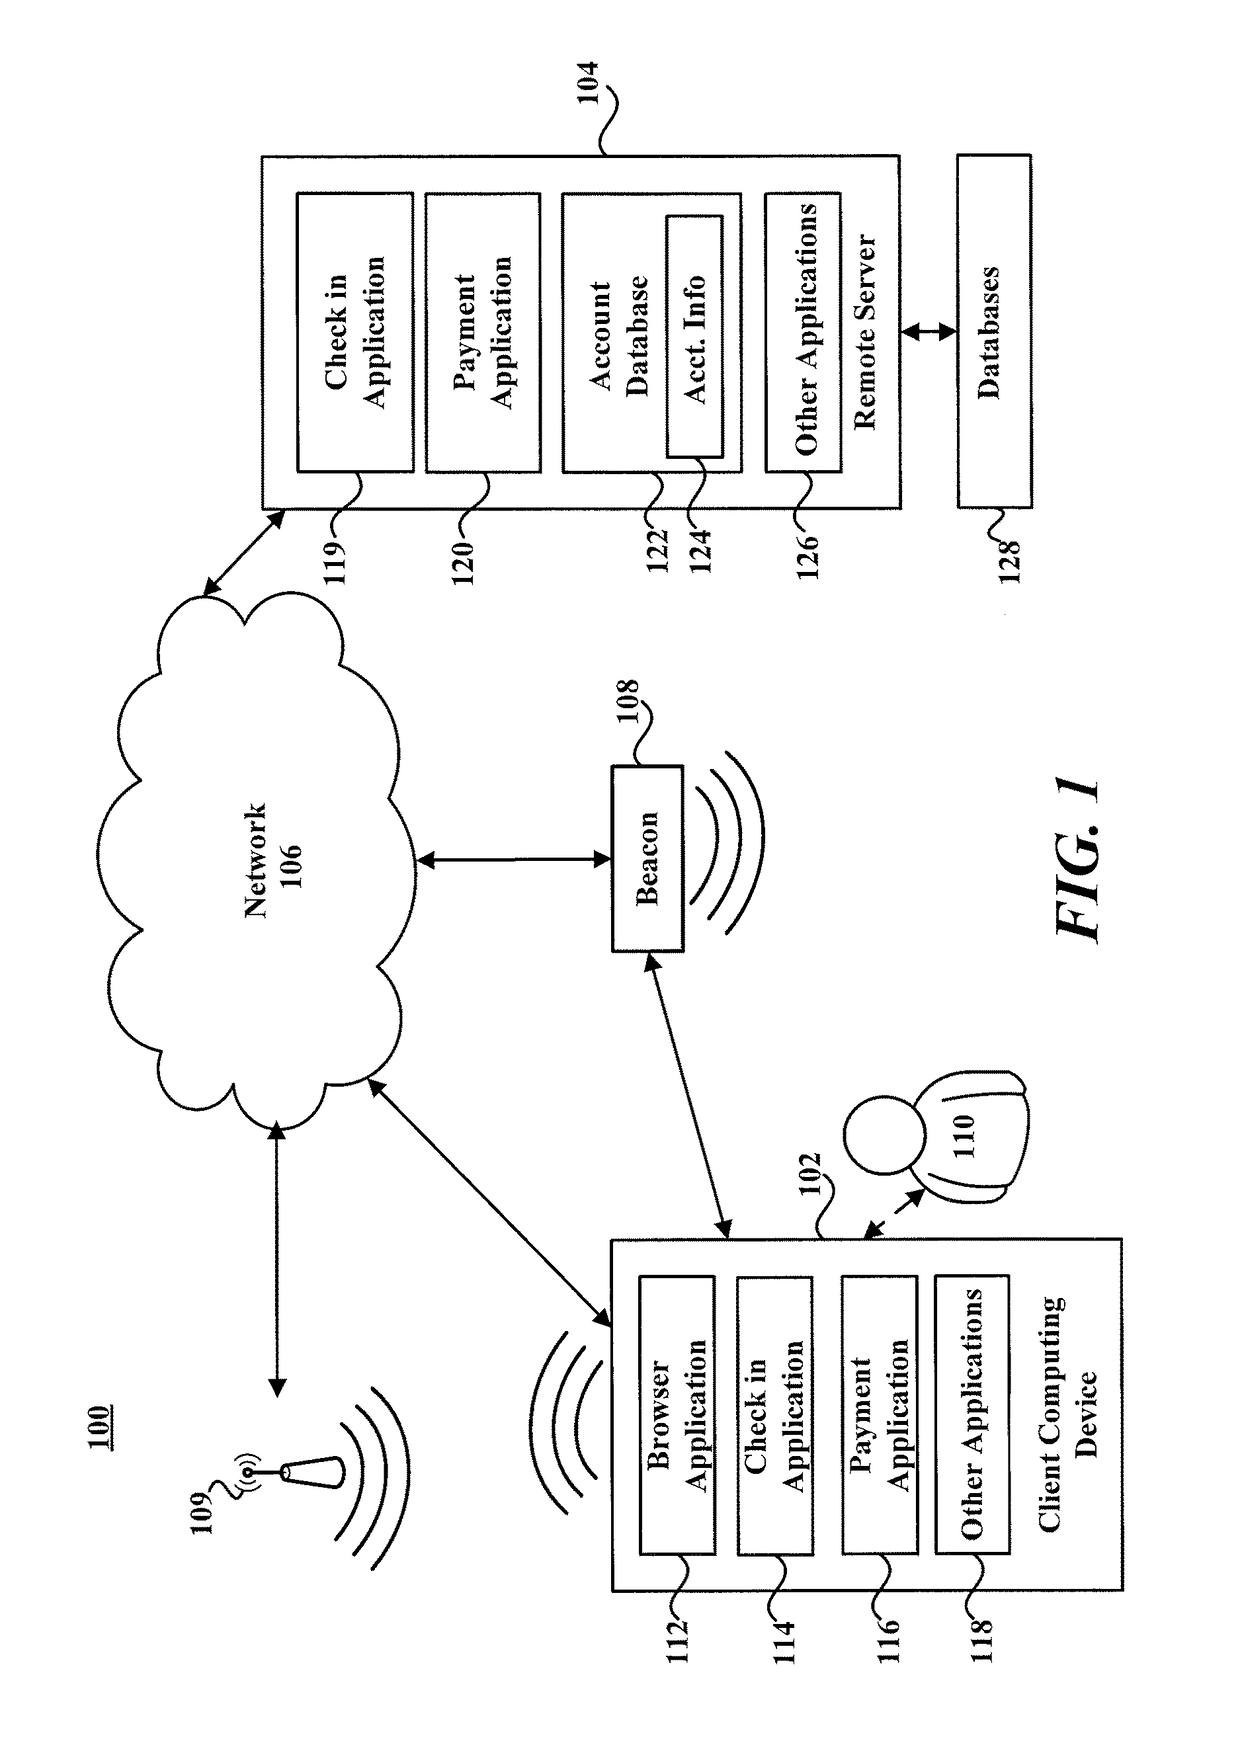 Facilitating wireless connections using a BLE beacon